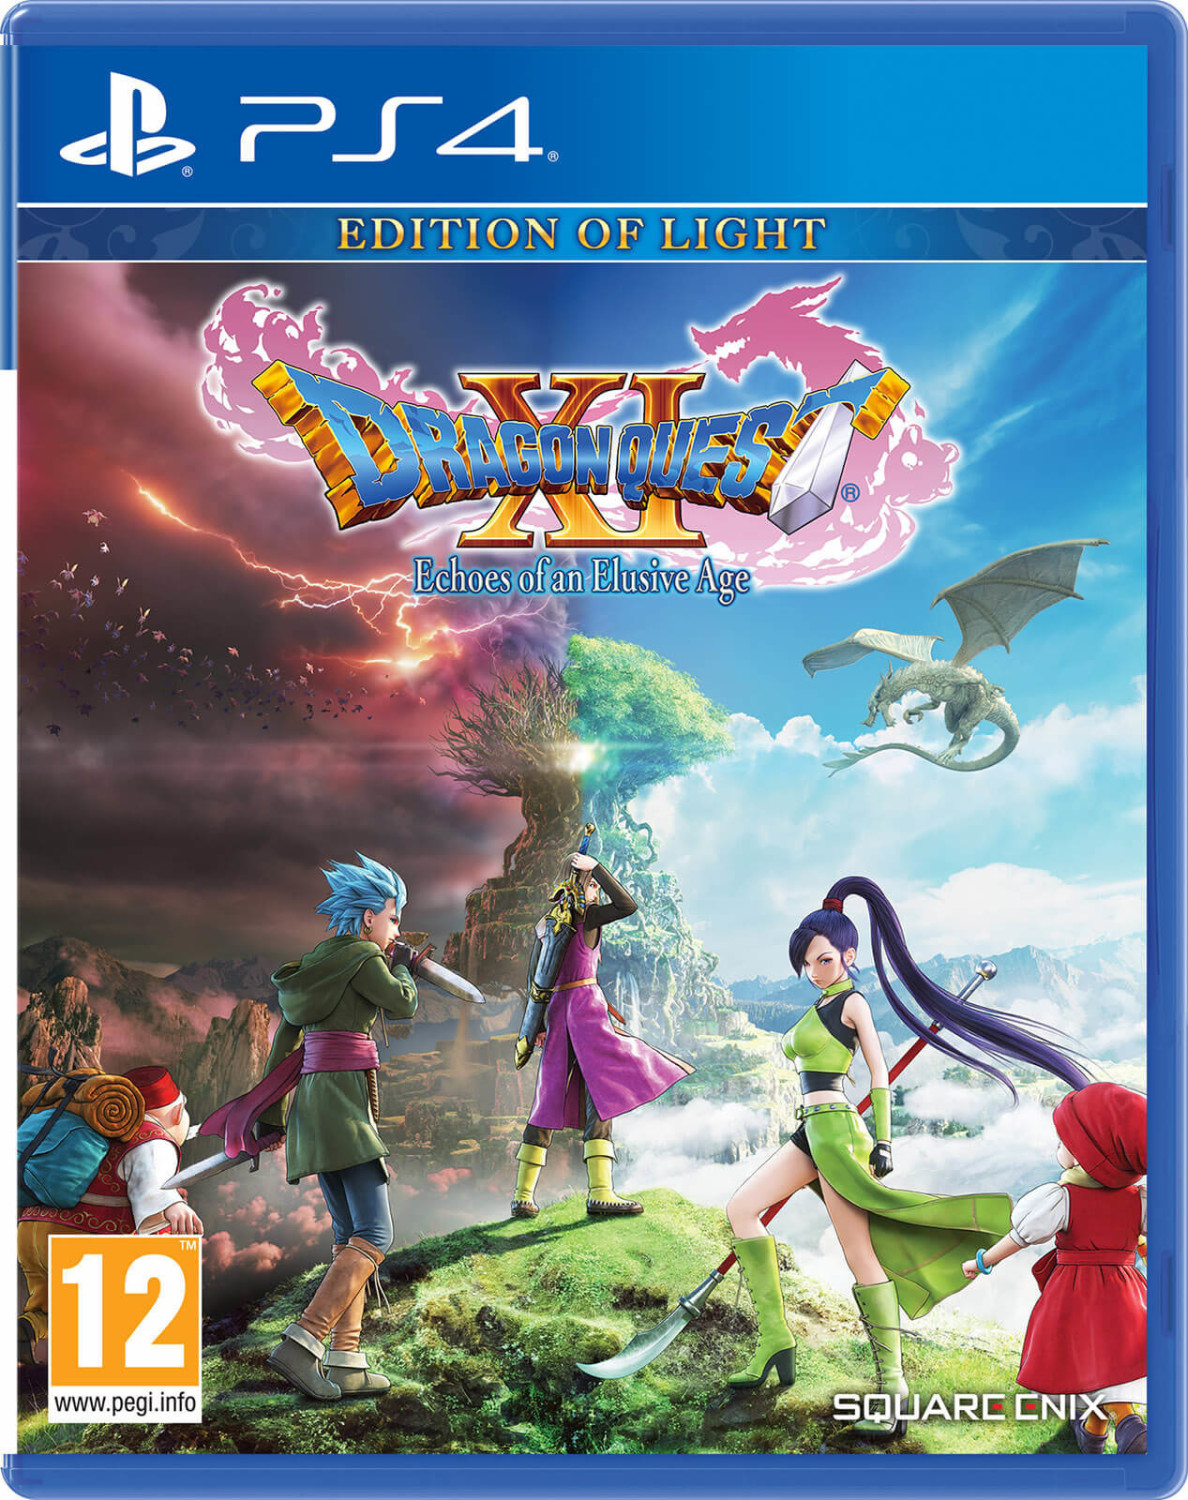 Photos - Game Square Enix Dragon Quest XI: Echoes of an Elusive Age - Edition of Light (